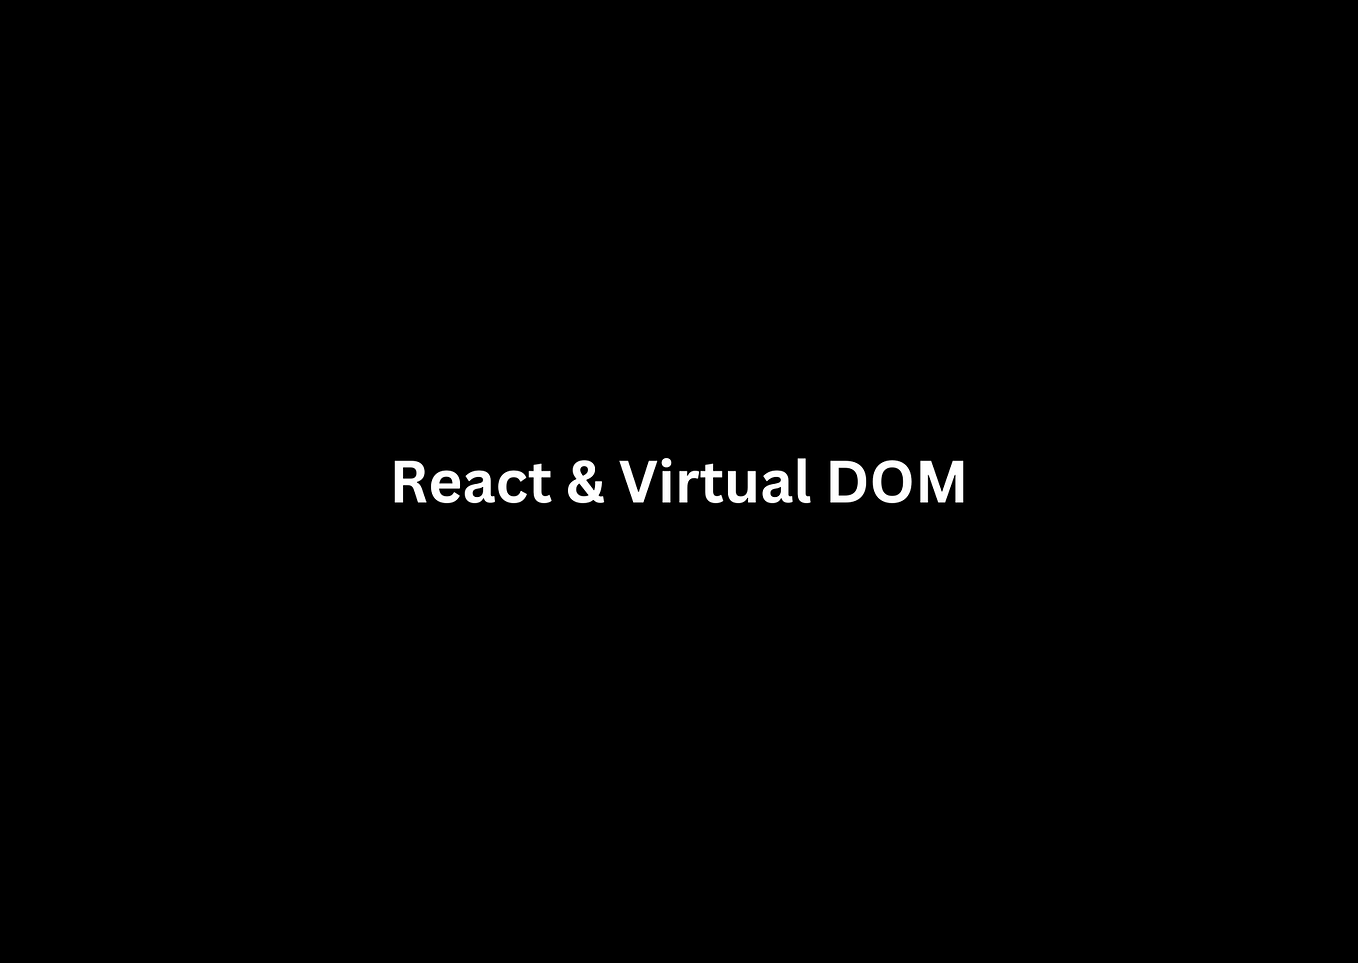 What is React and Virtual DOM?